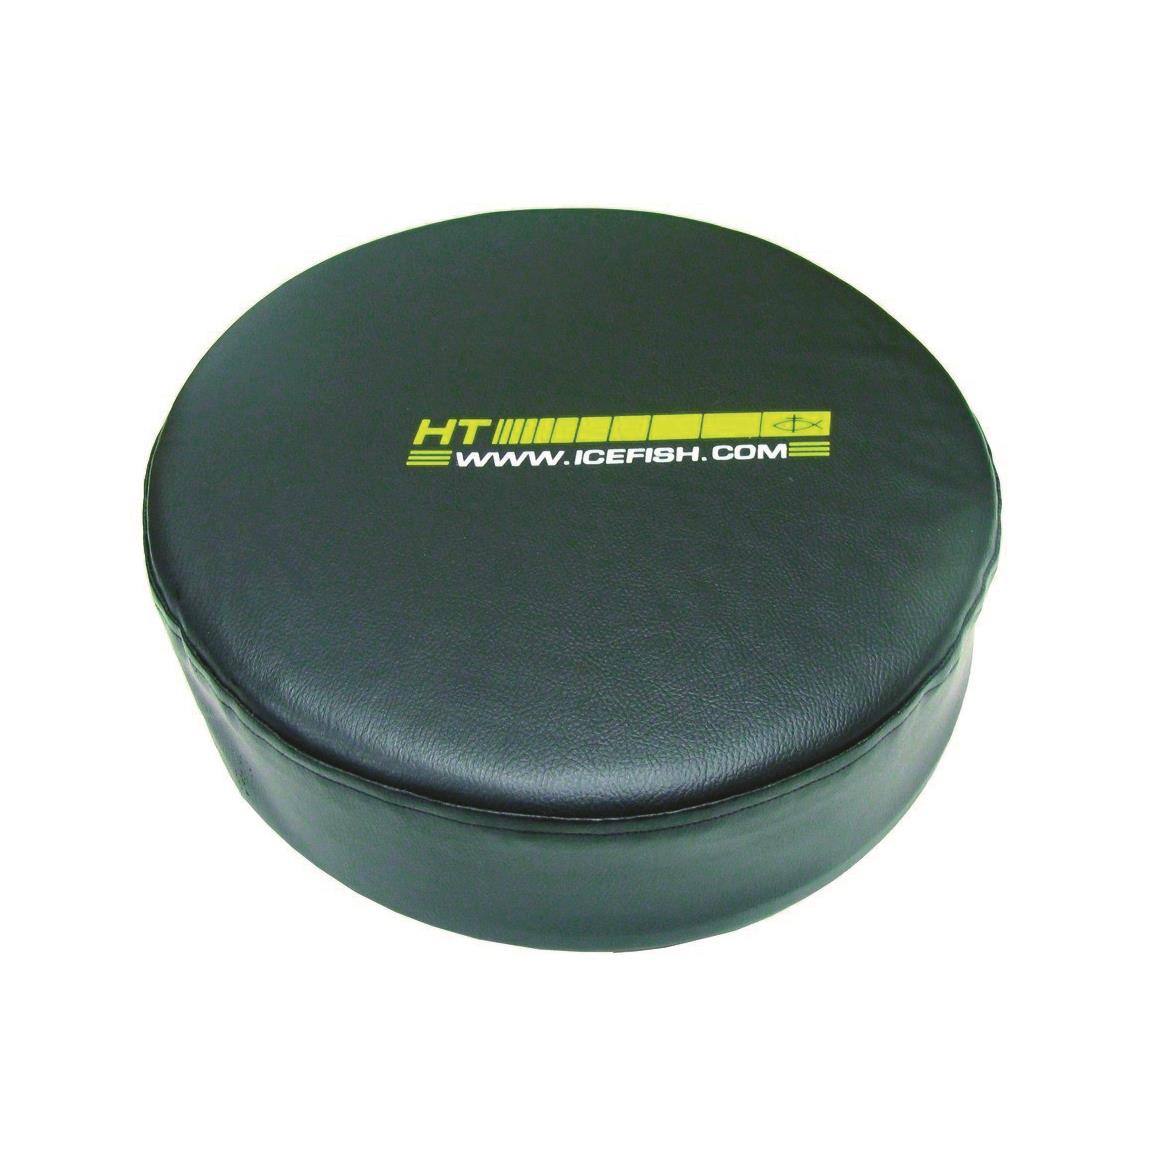 HT Padded Ice Bucket Seat 670248, Ice Fishing Gear at